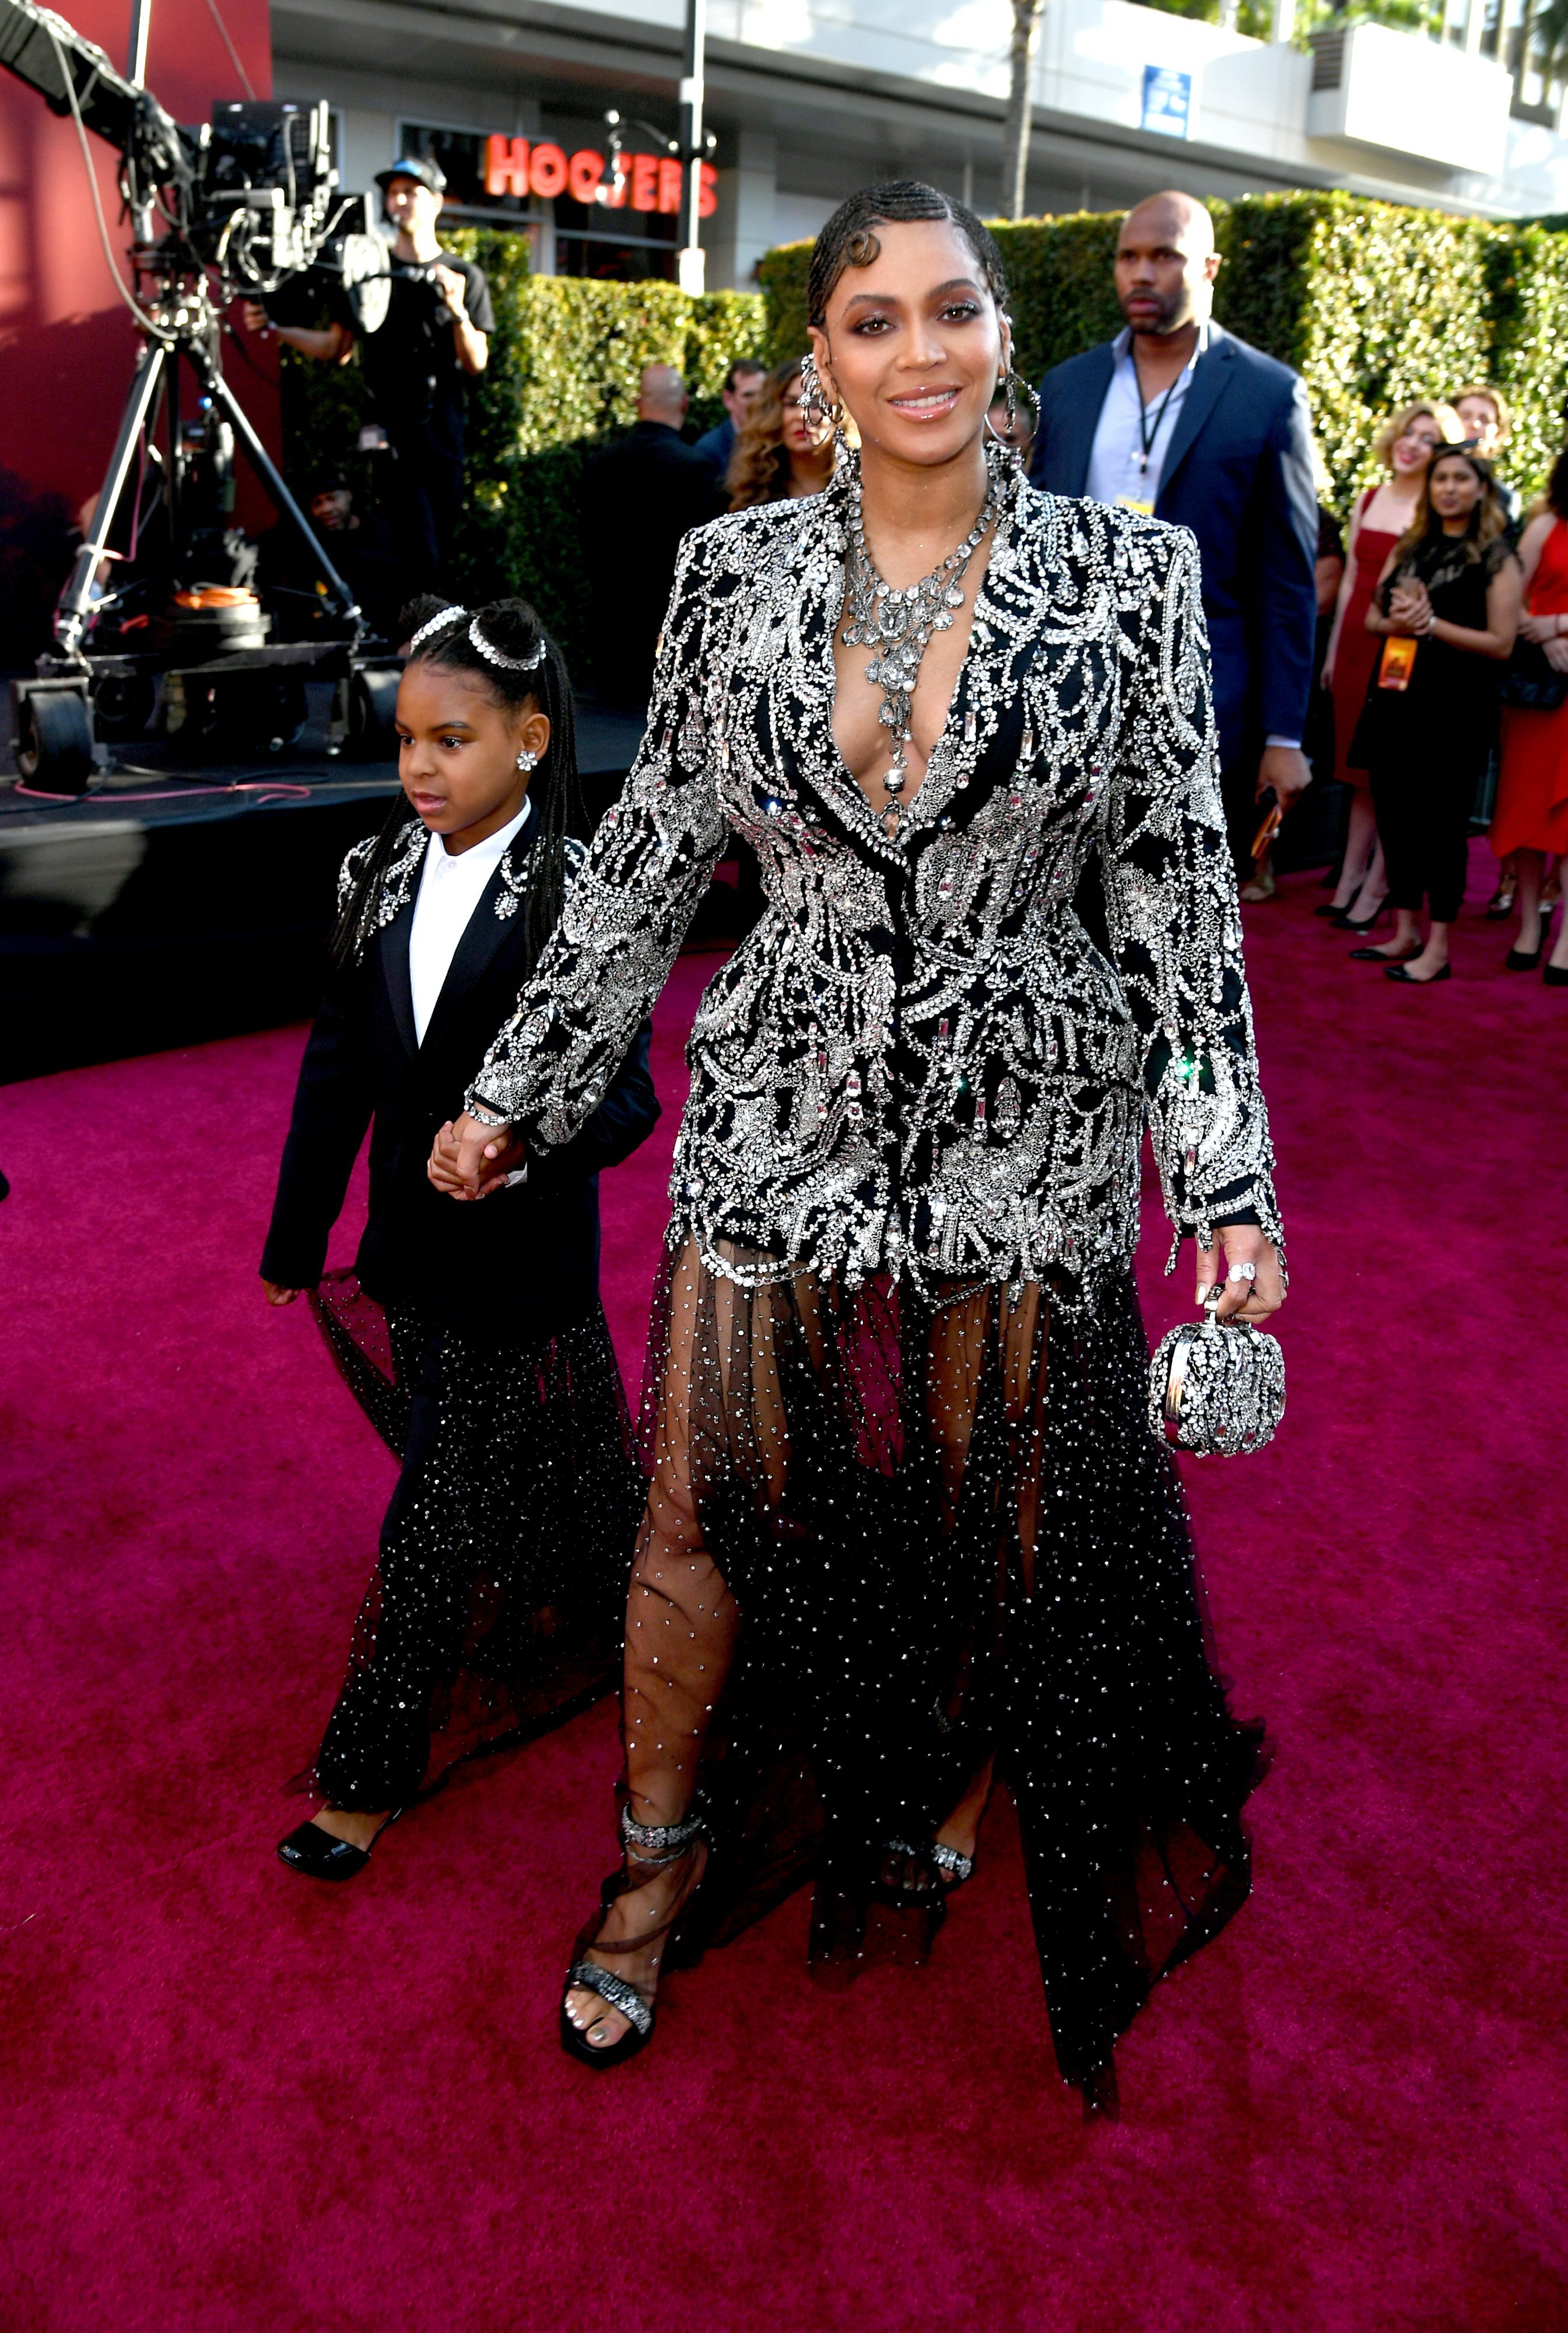 Beyonce attends the Hollywood premiere of "The Lion King" with her daughter, Blue Ivy Carter. | Source: Getty